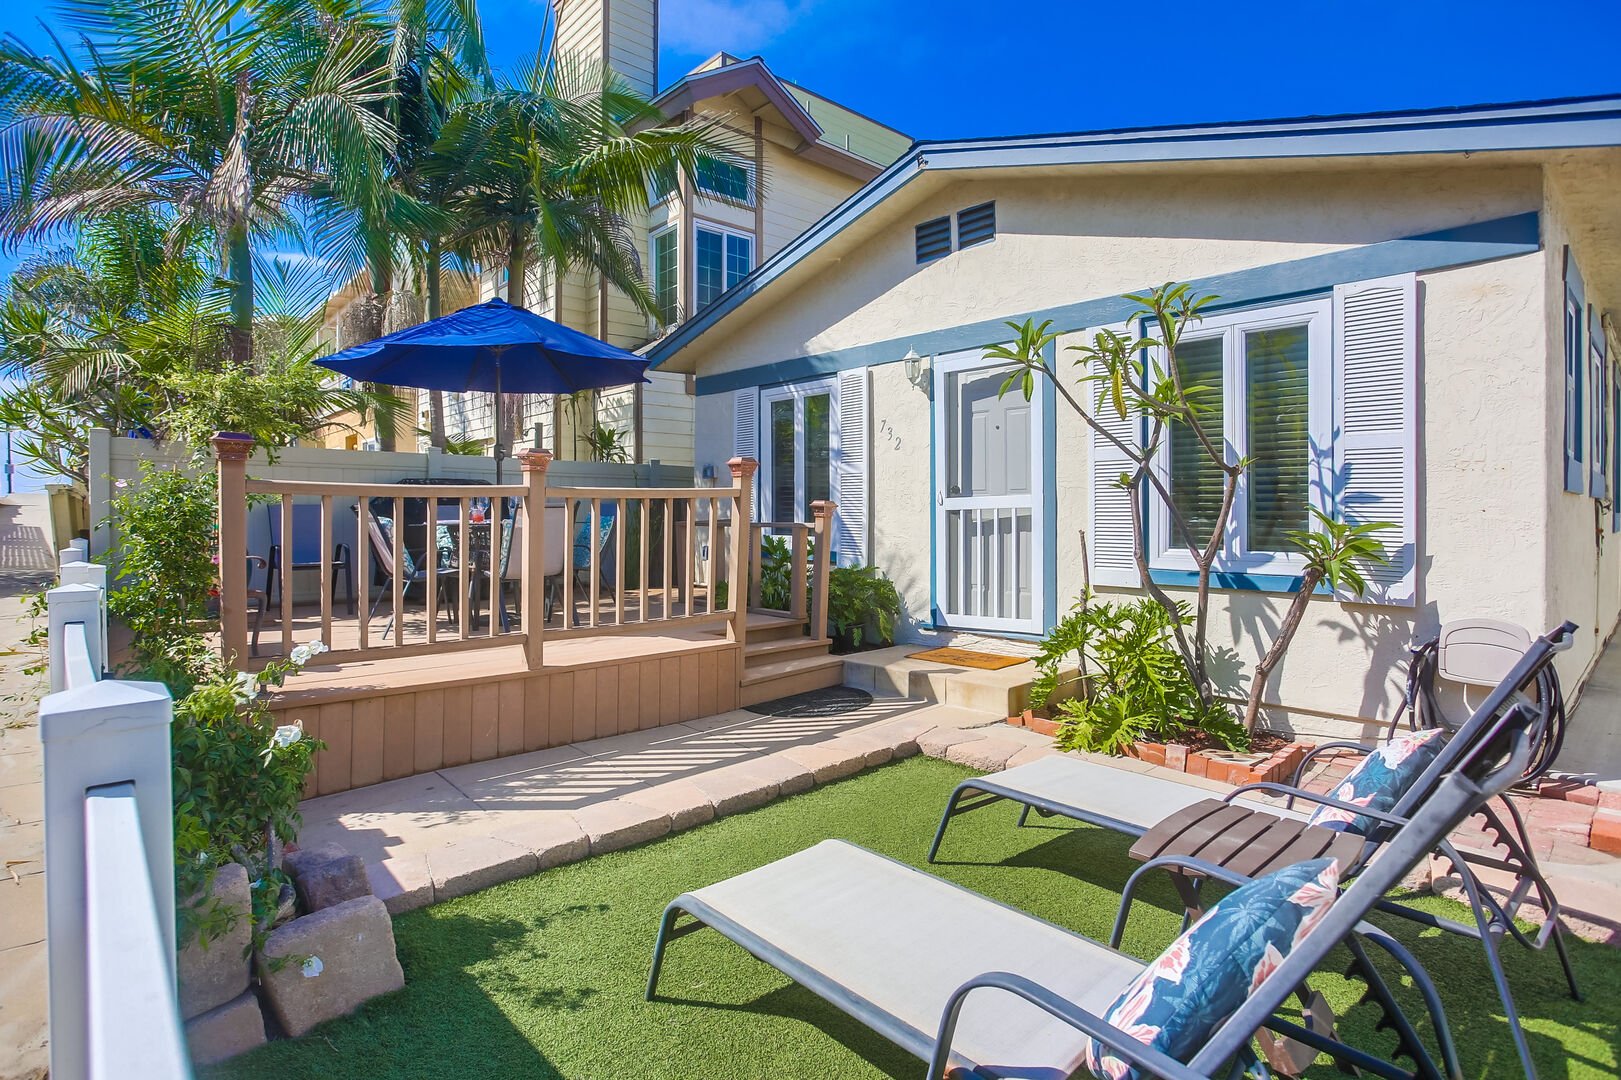 Private front yard space with lounge chairs, dining table for 4-6 guests, large umbrella, BBQ and beach access